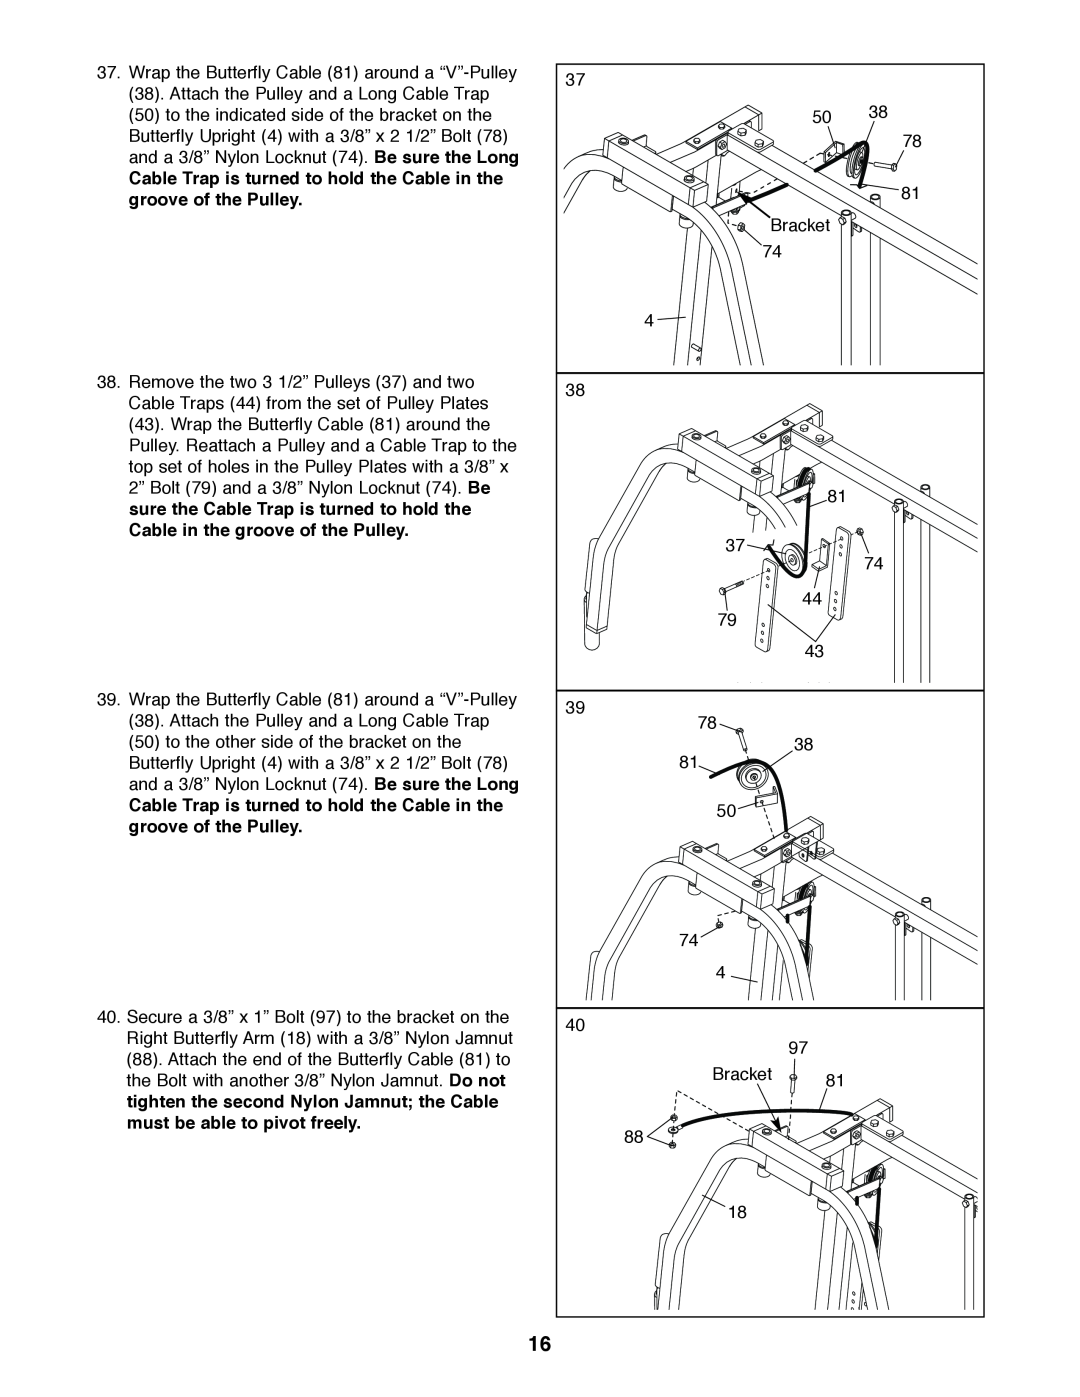 Weider 831.159530 user manual Cable Trap is turned to hold the Cable in the groove of the Pulley 